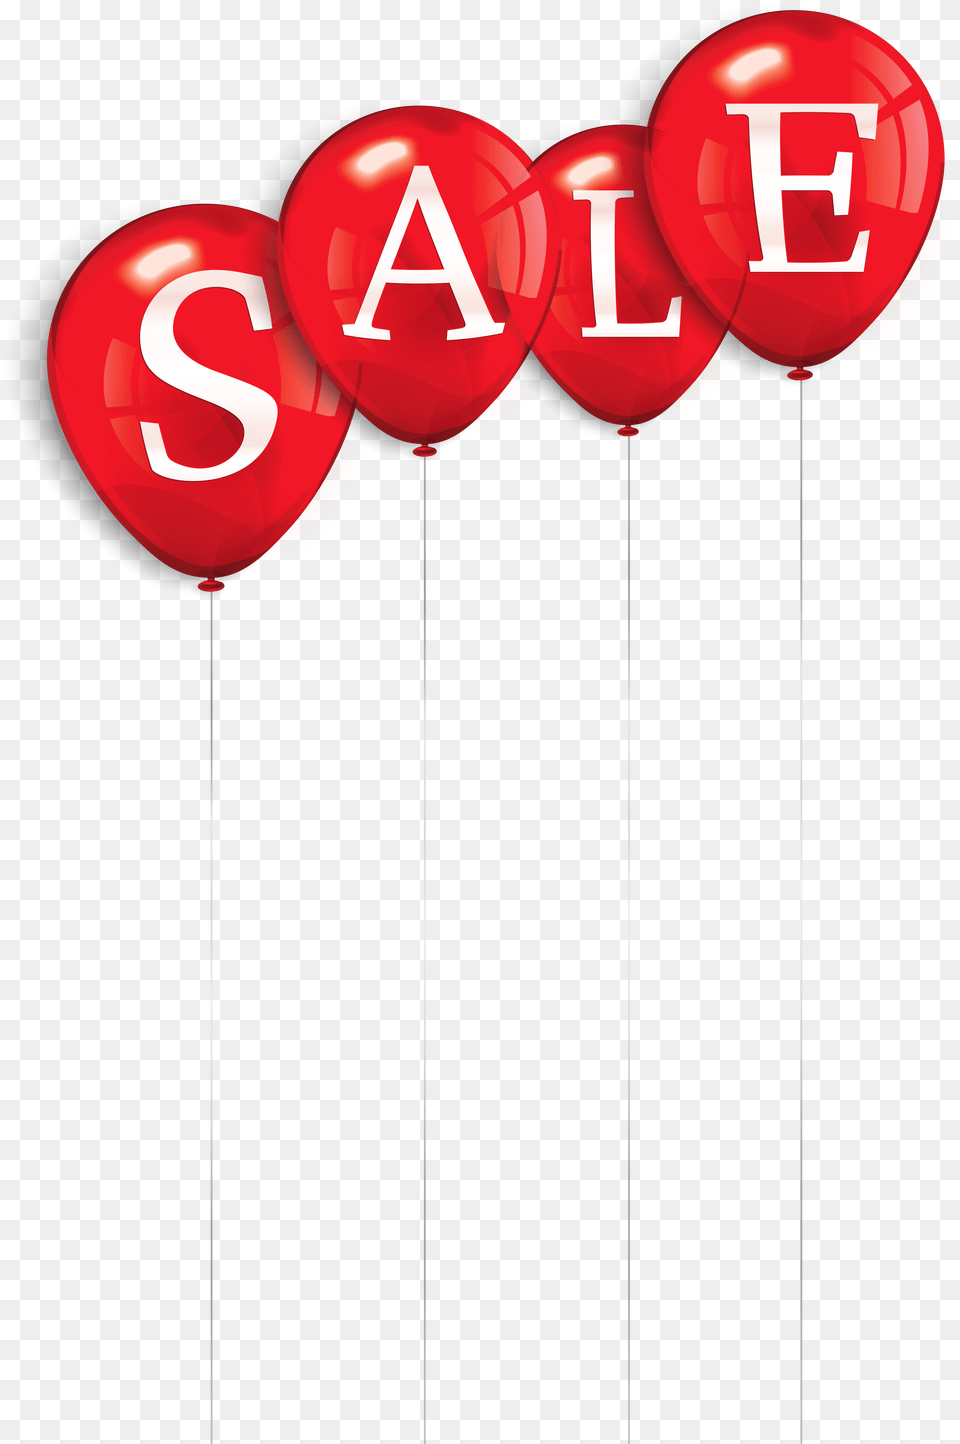 Balloons Sale Image Gallery Yopriceville High Sale Balloons, Balloon Png